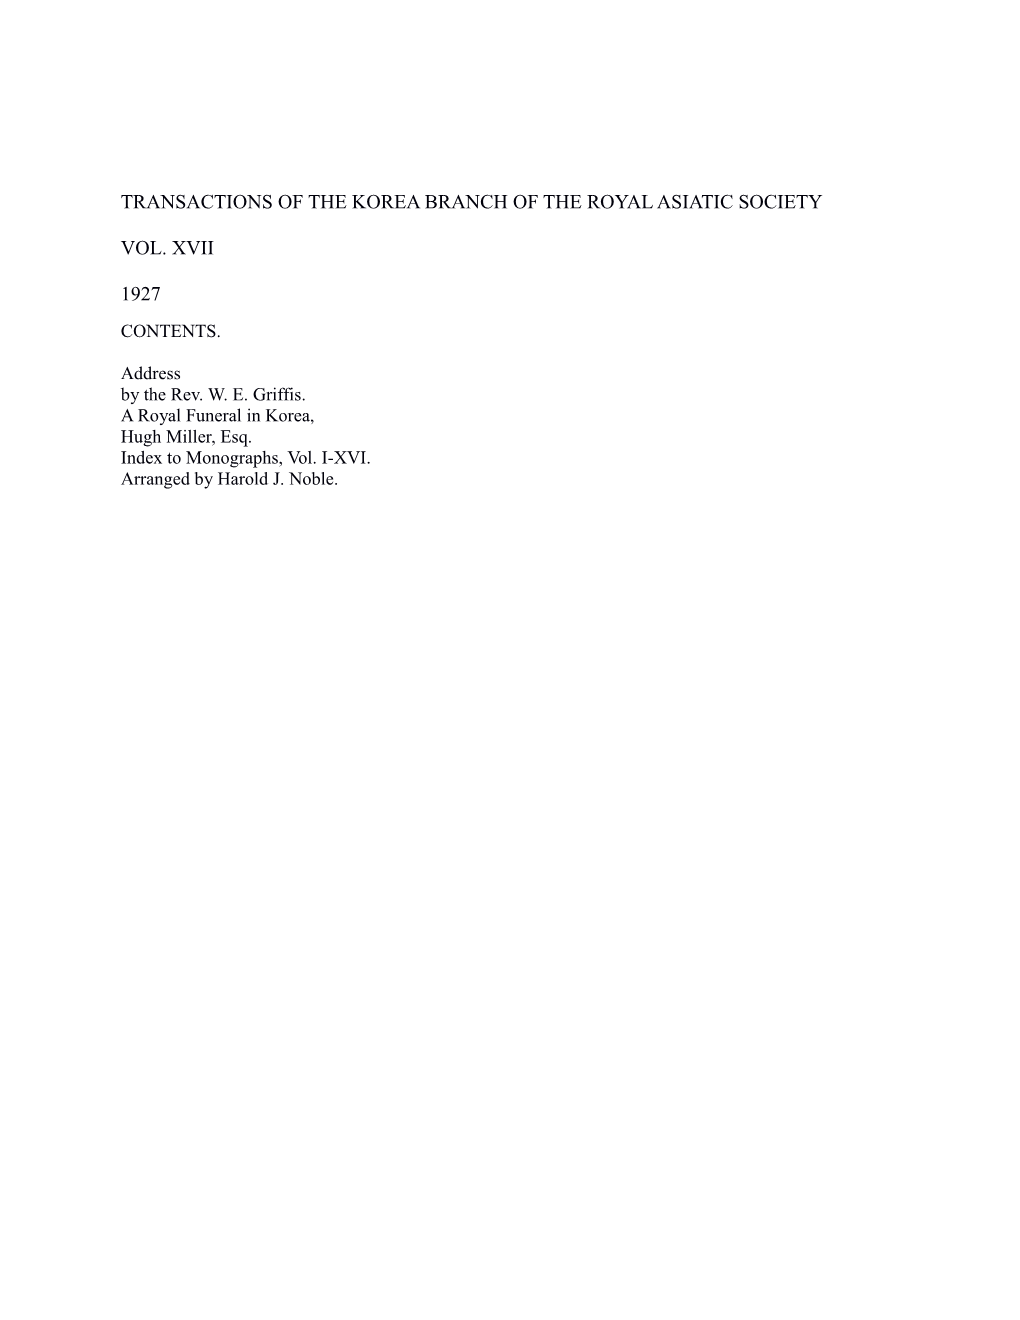 Transactions of the Korea Branch of the Royal Asiatic Society s1